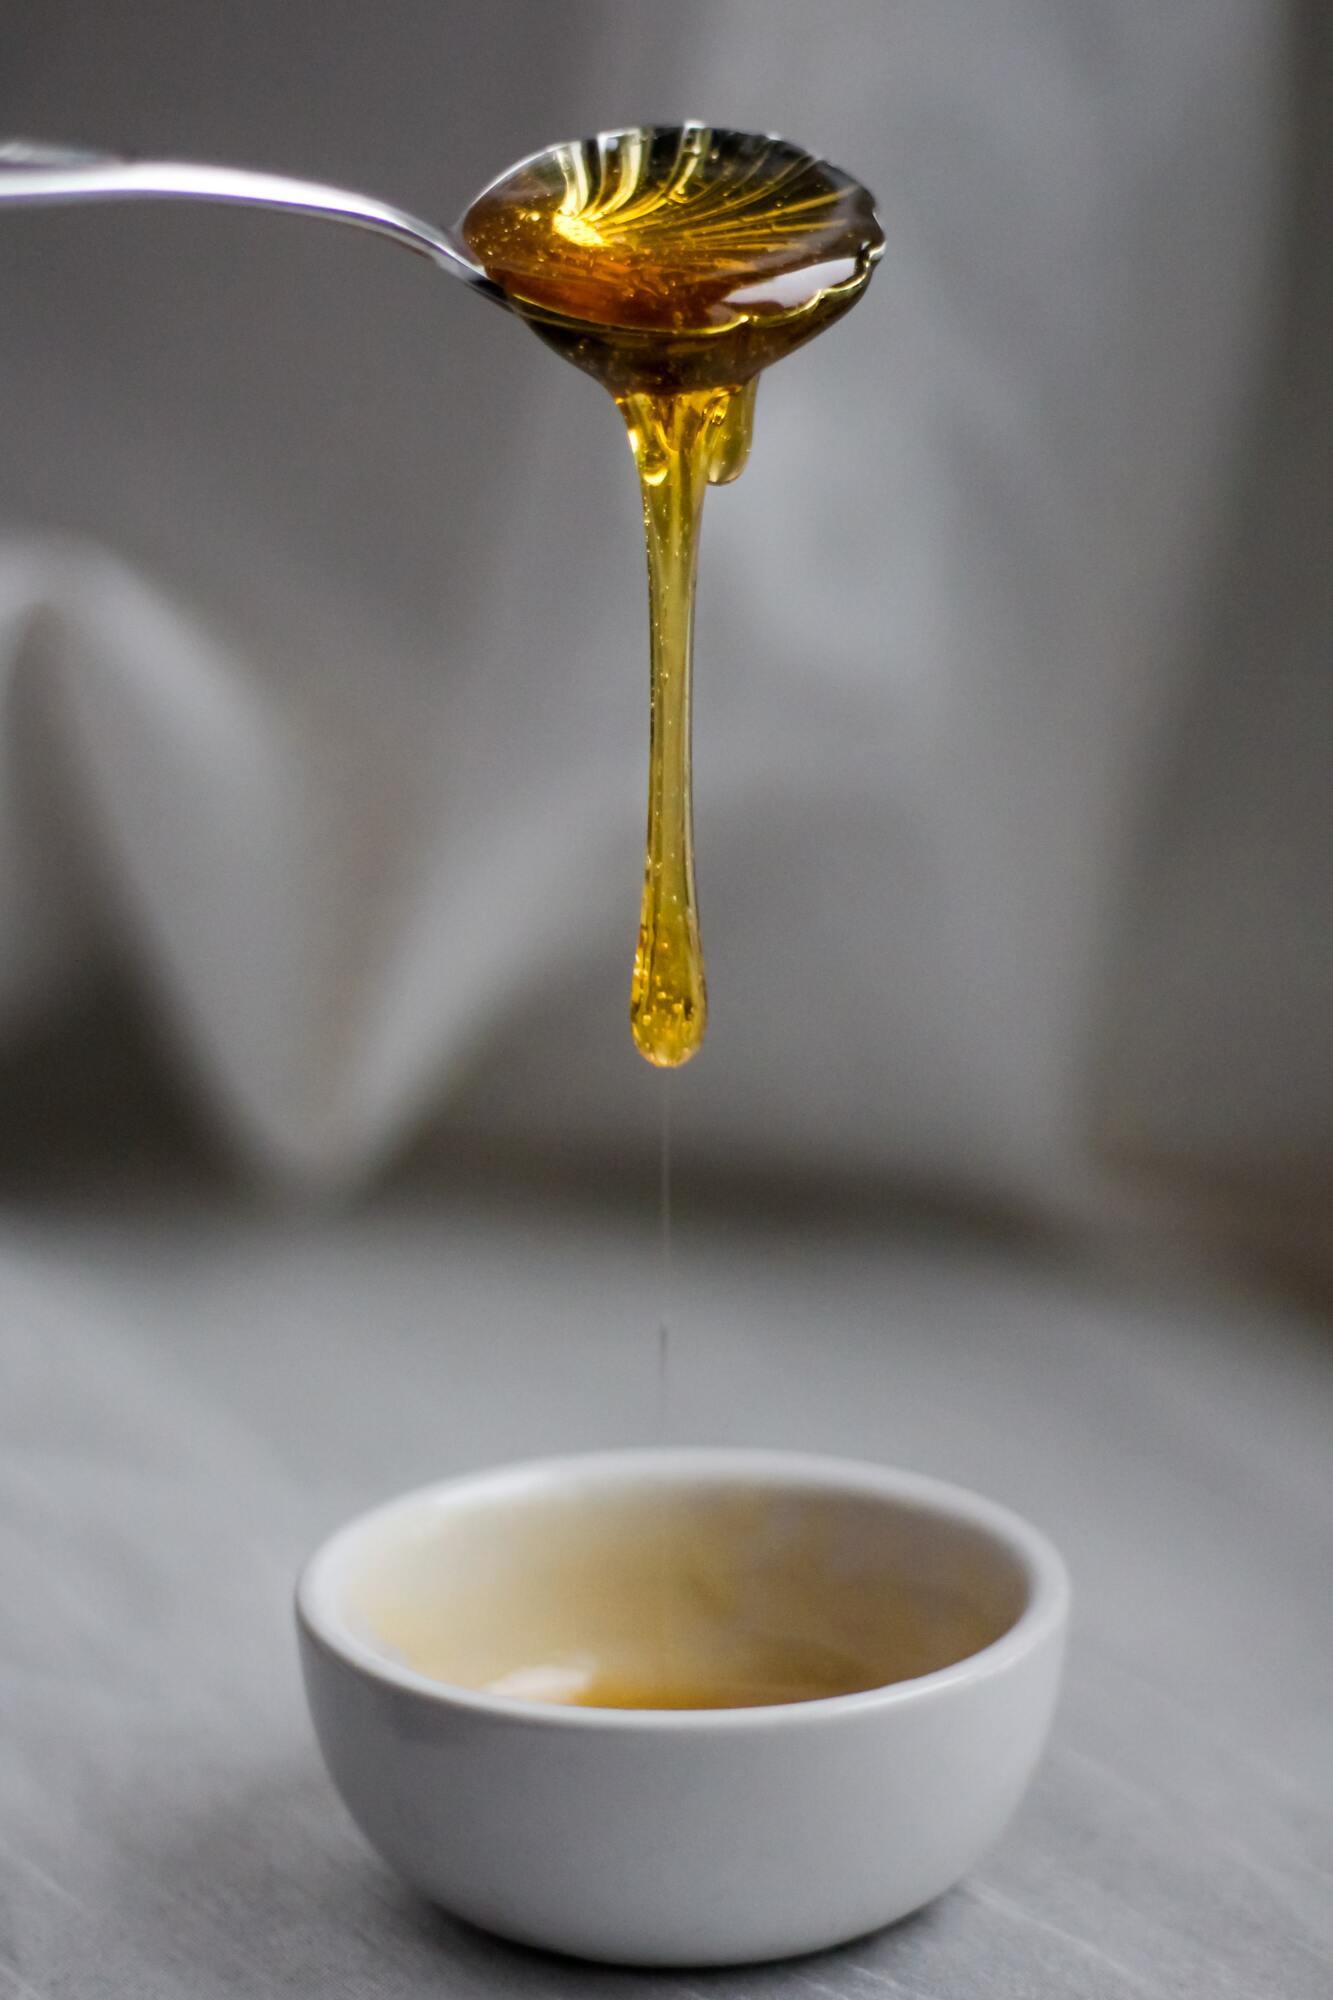 Why honey is harmful: the insidiousness of a popular antiviral